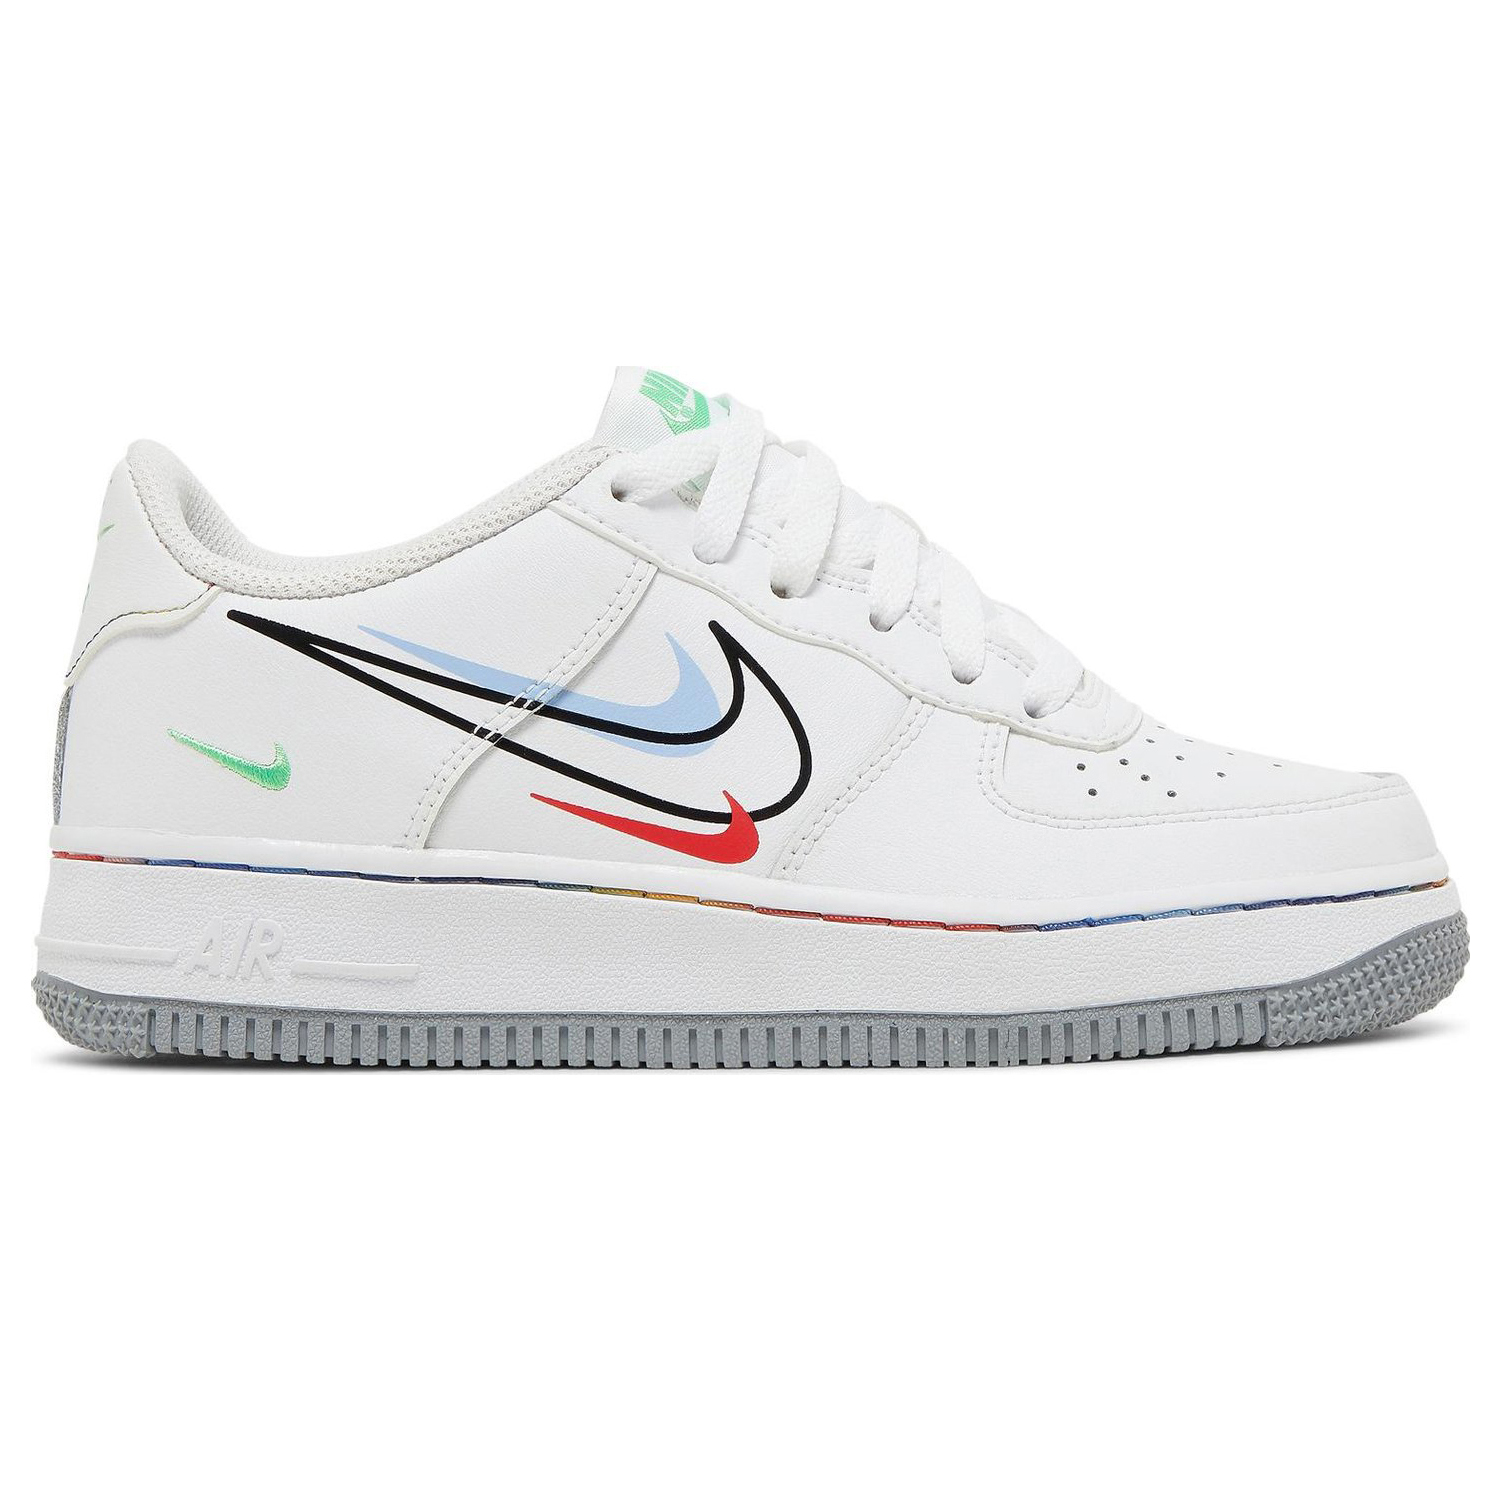 Кроссовки Nike Air Force 1 Low GS 'Multi Swoosh', белый original authentic nike air force 1 low mini swoosh men s skateboarding shoes sport outdoor sneakers 2018 new arrival 823511 603